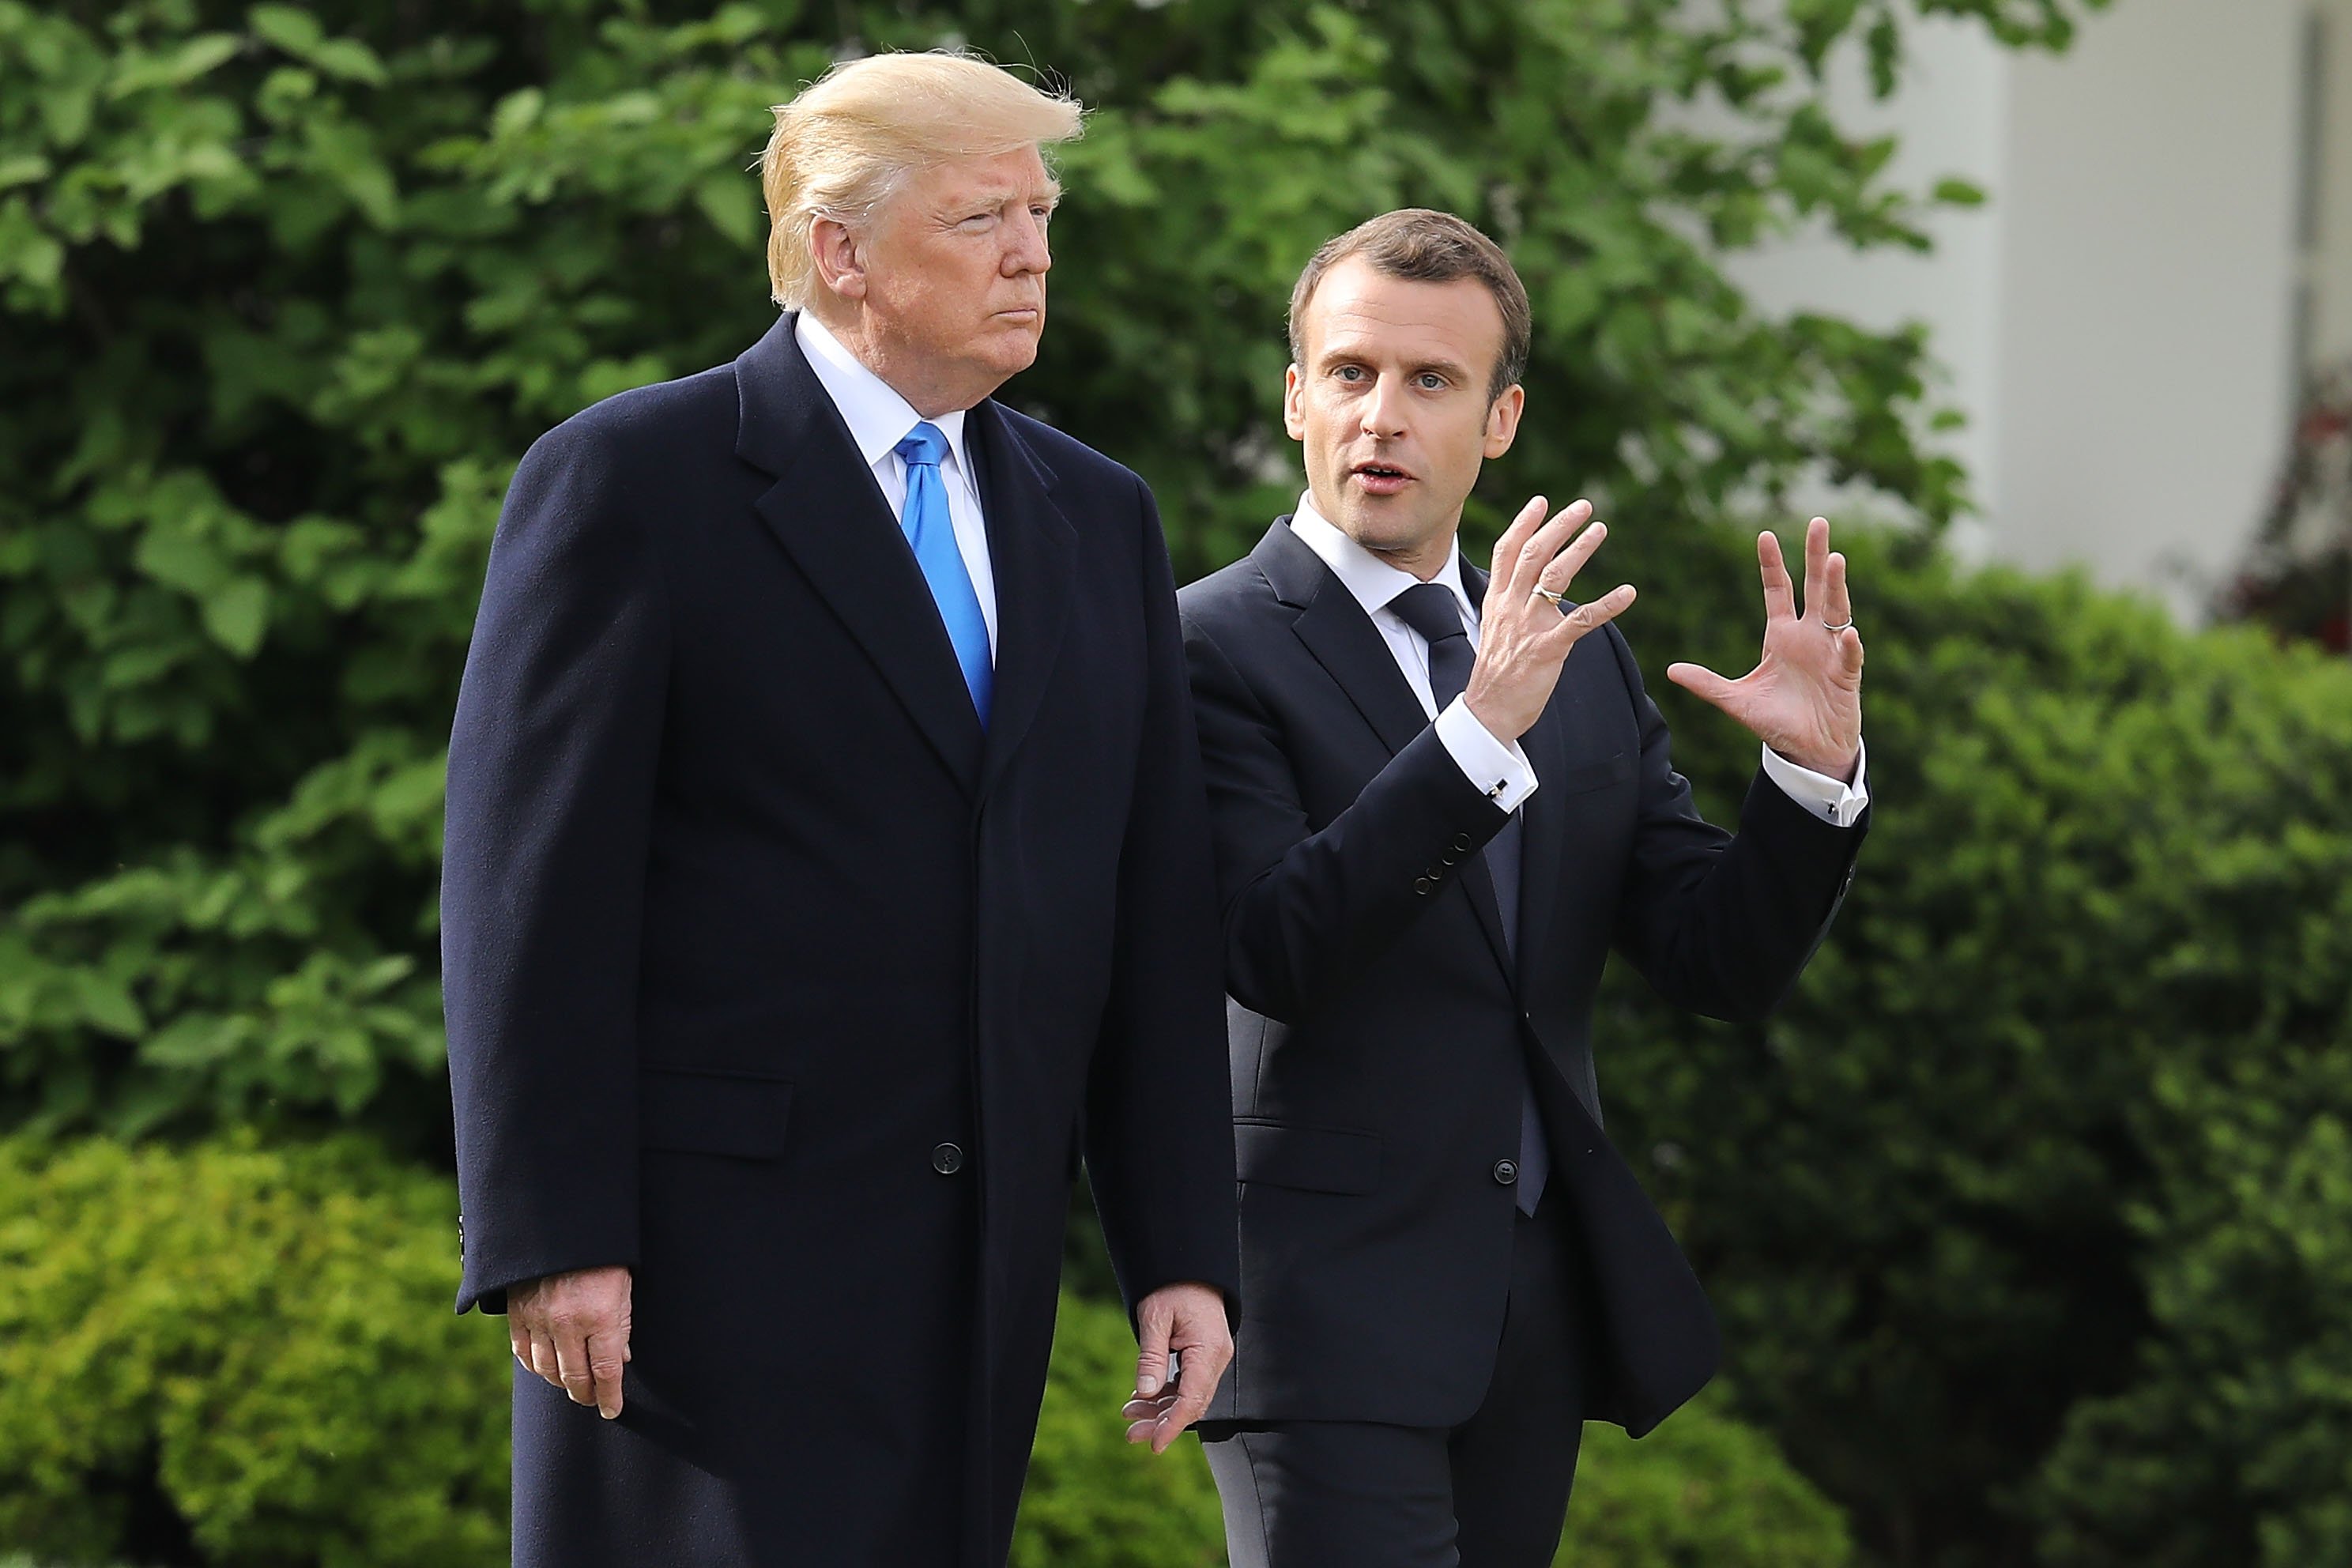 WASHINGTON, DC - APRIL 23: U.S President Donald Trump (L) and French President Emmanuel Macron walk out of the White House before participating in a tree-planting ceremony on the South Lawn April 23, 2018 in Washington, DC. Trump is hosting Macron for a two day offical visit that will include dinner at George Washington's Mount Vernon, a tree planting on the White House South Lawn and a joint news conference. (Photo by Chip Somodevilla/Getty Images)